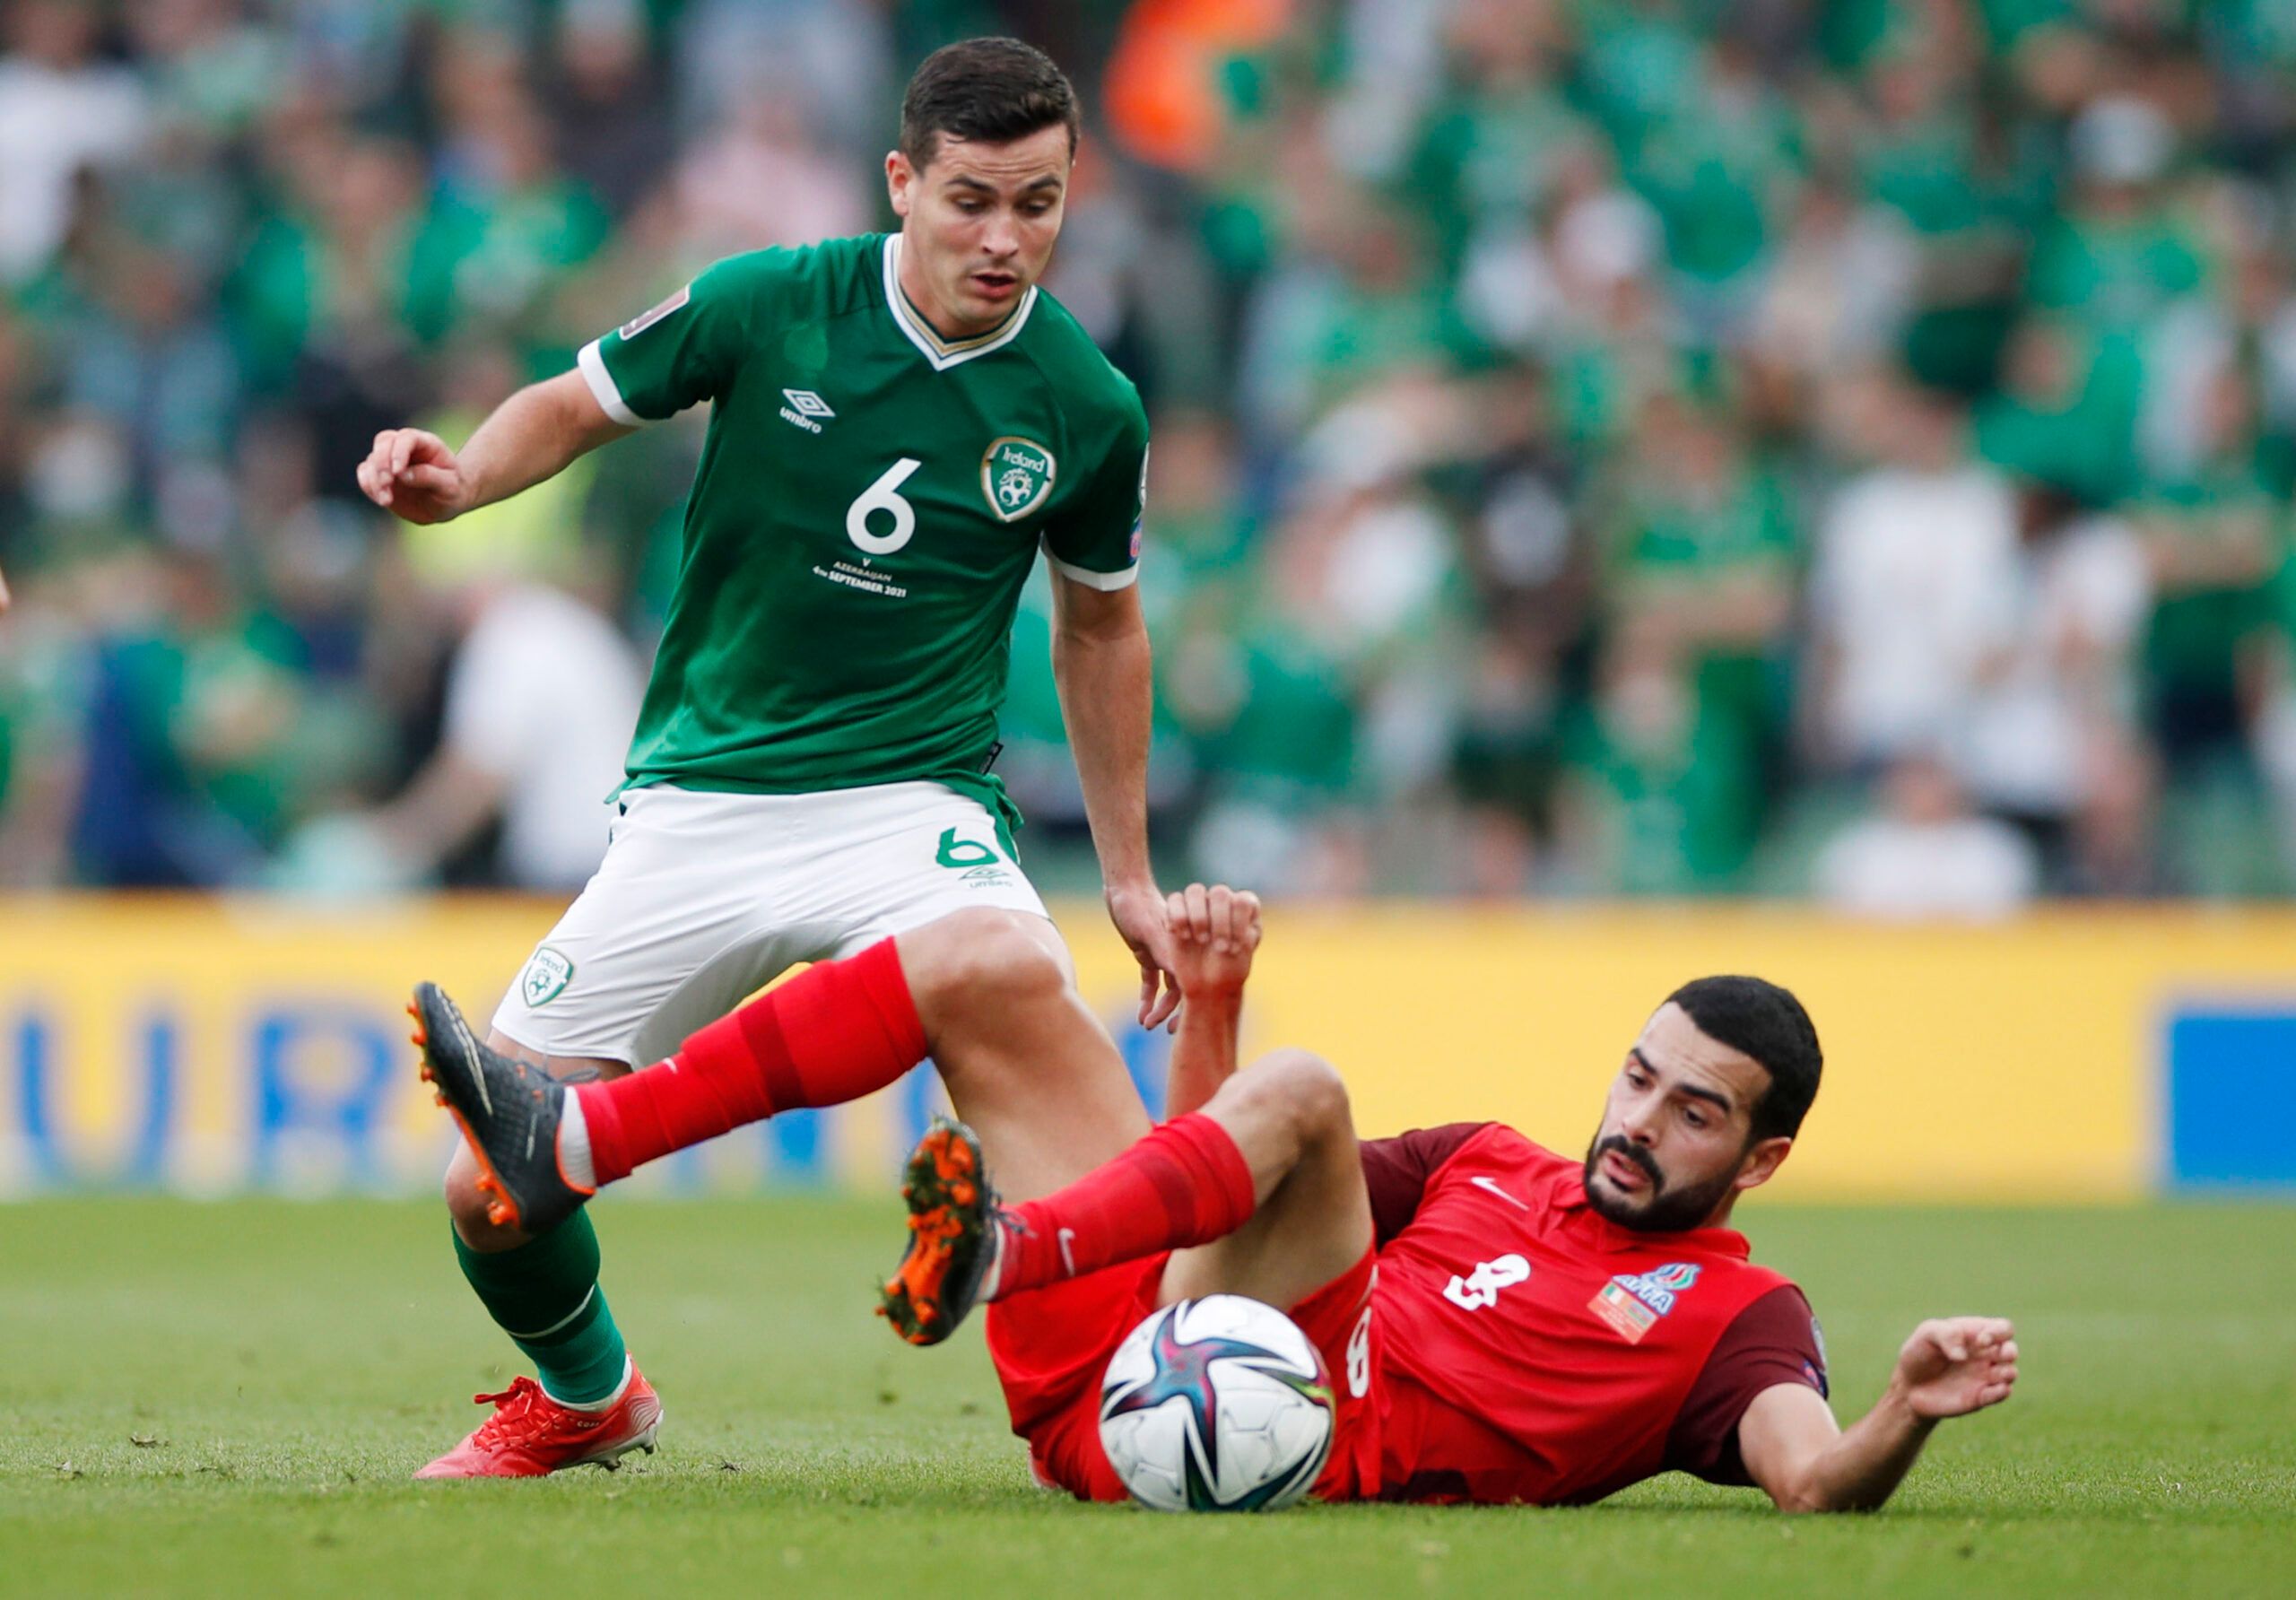 Soccer Football - World Cup - UEFA Qualifiers - Group A - Republic of Ireland v Azerbaijan - Aviva Stadium, Dublin, Ireland - September 4, 2021  Republic of Ireland's Josh Cullen in action with Azerbaijan's Emin Makhmudov Action Images via Reuters/Paul Childs